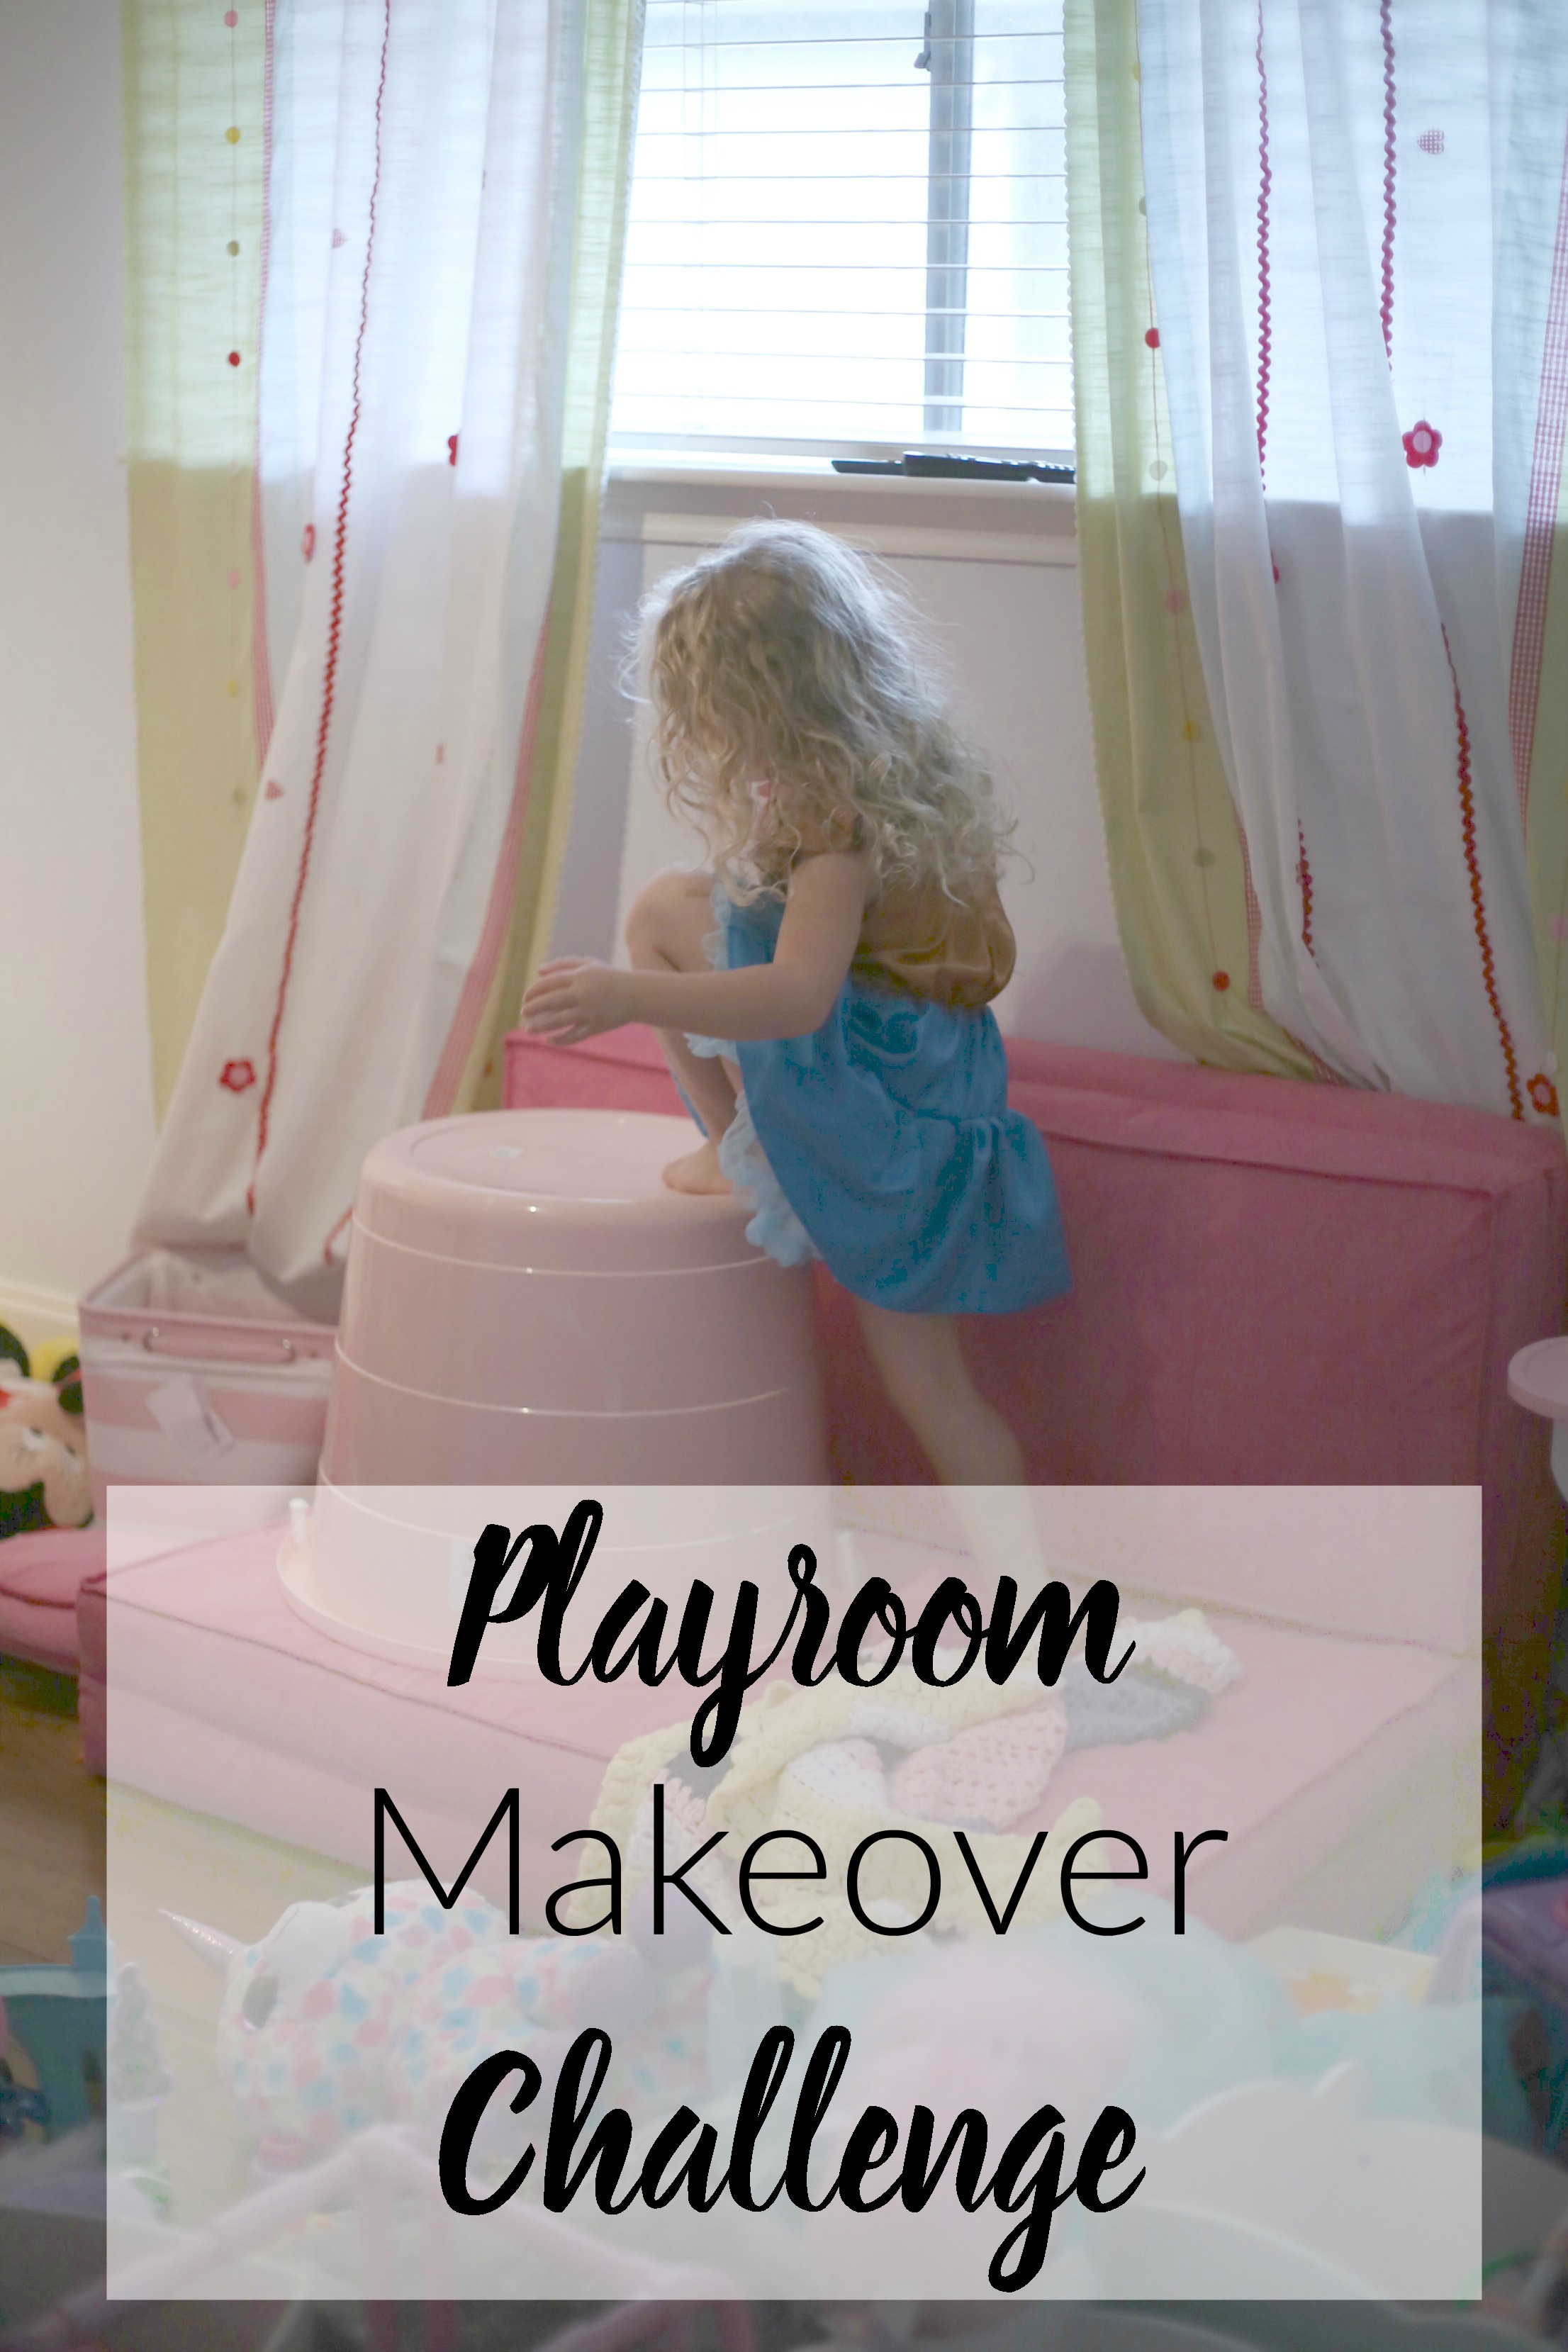 Playroom Makeover Challenge. Such great ideas on turning a playroom for toddlers into one for growing kids. 